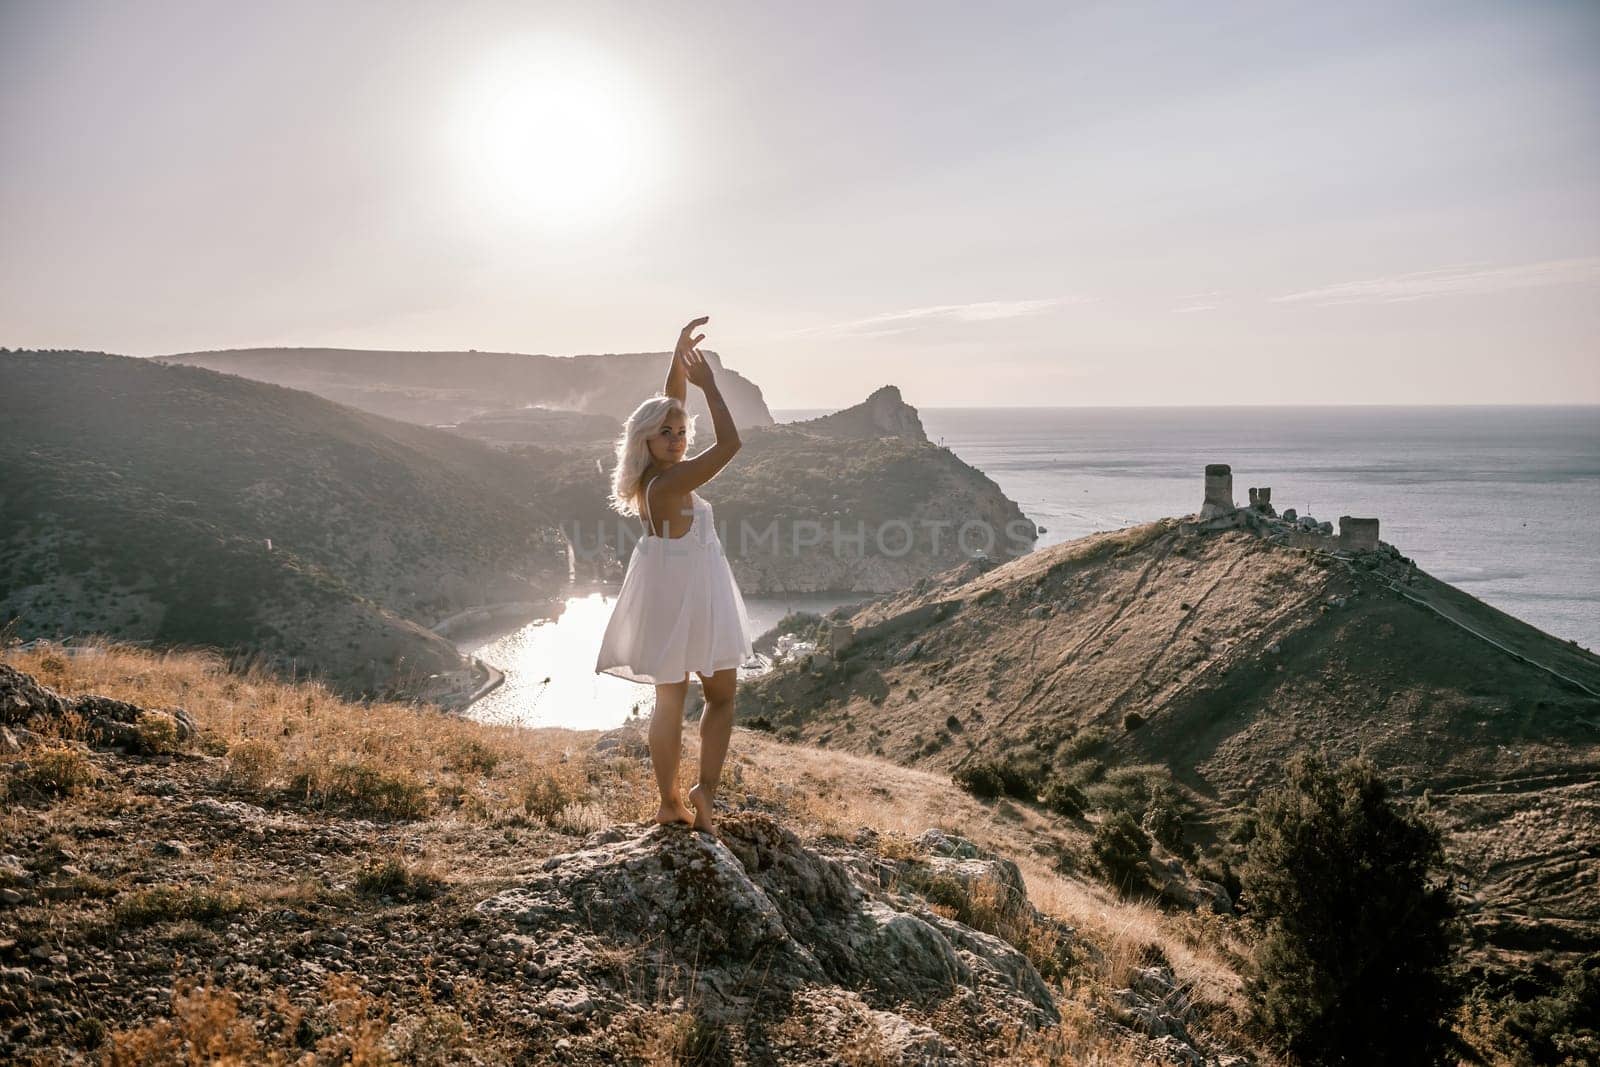 A woman stands on a hill overlooking a body of water. She is wearing a white dress and she is enjoying the view. by Matiunina